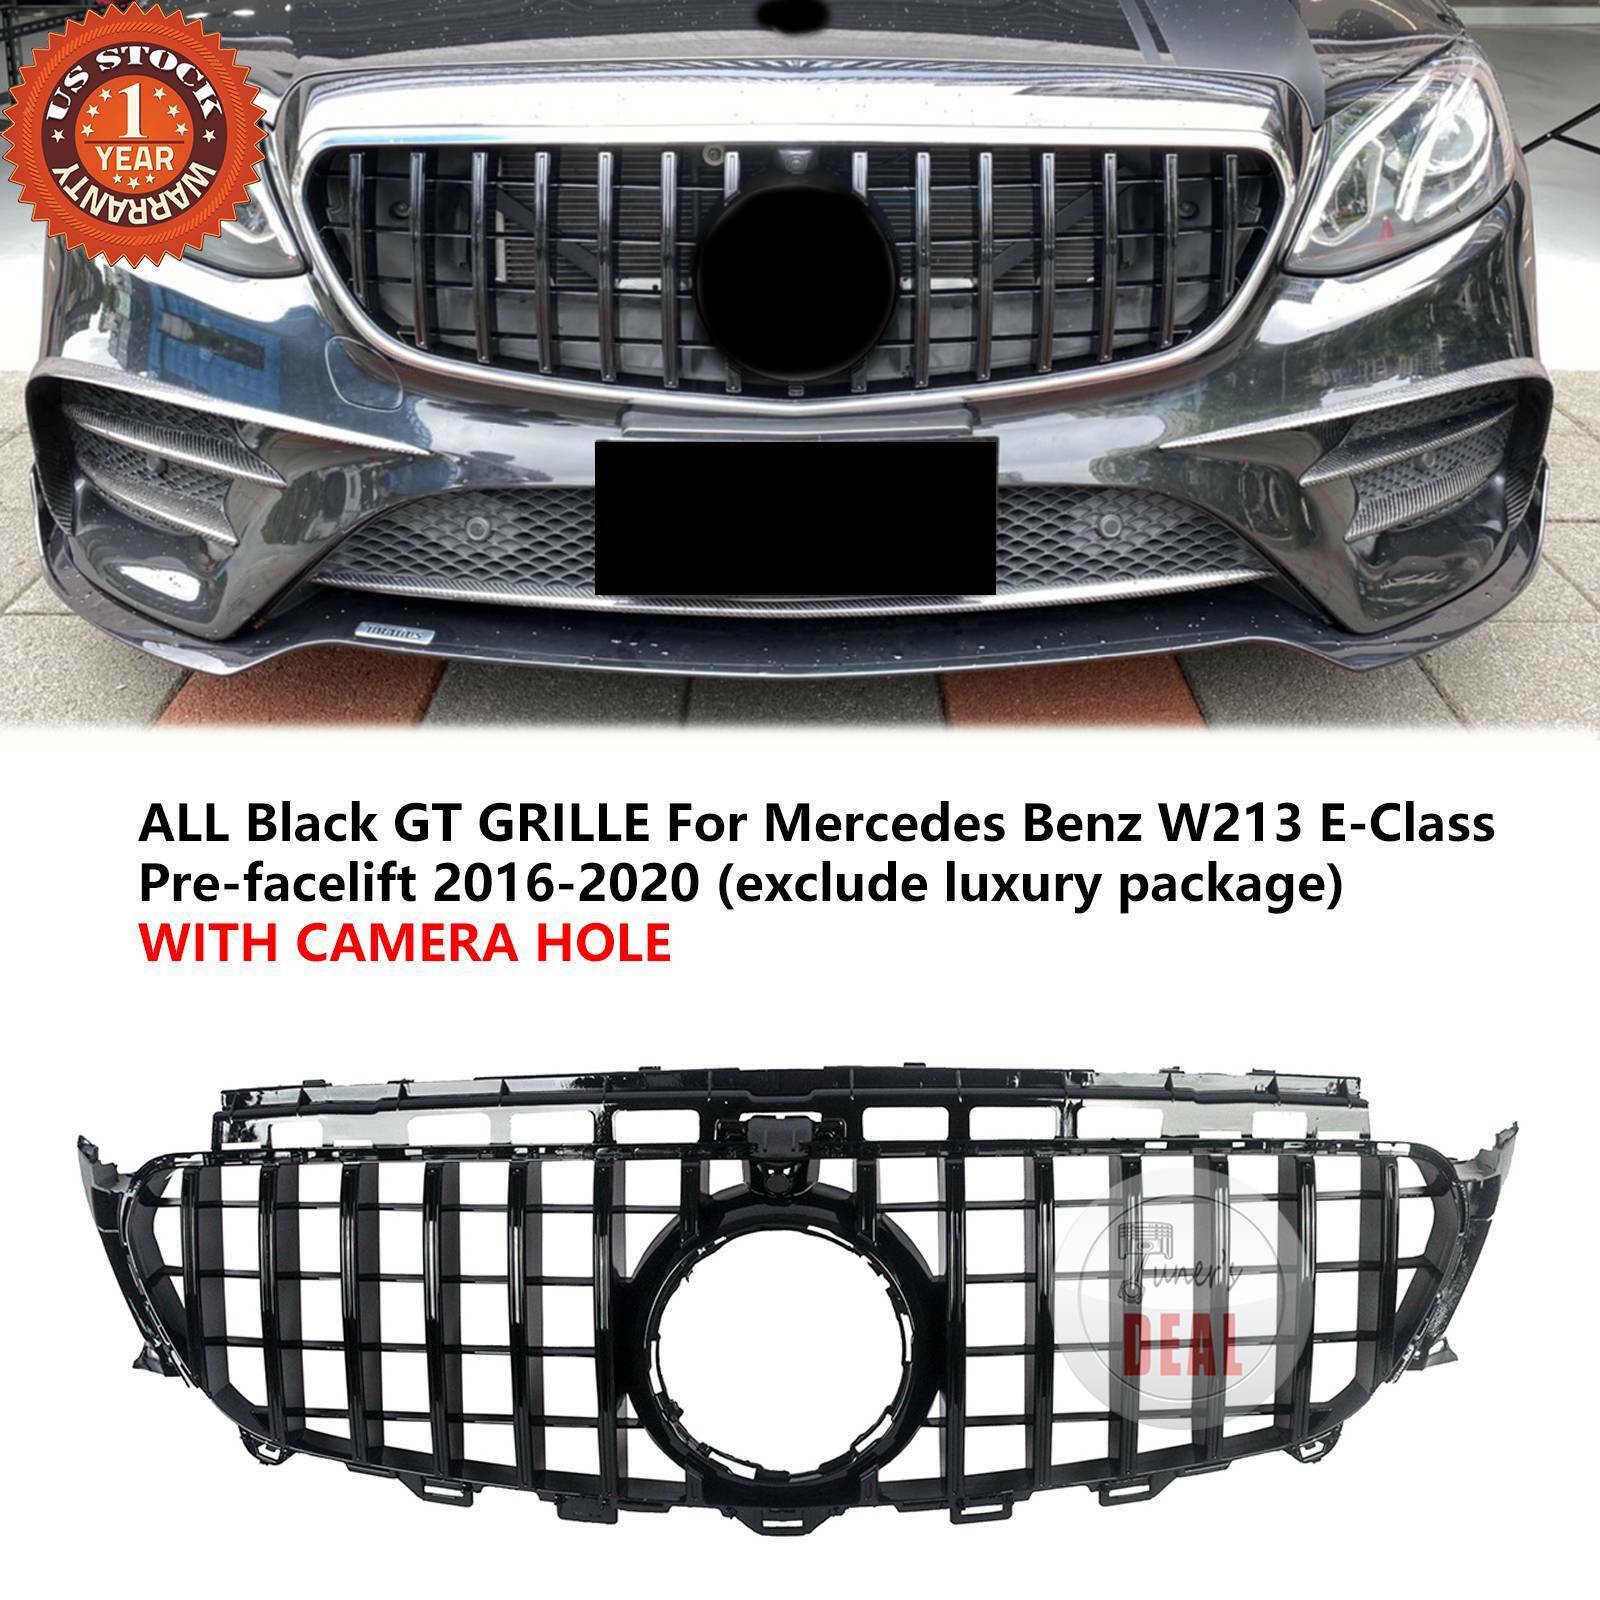 Black GT R Grille W/ CAMERA HOLE For Mercedes Benz W213 E-CLASS 2016-2020